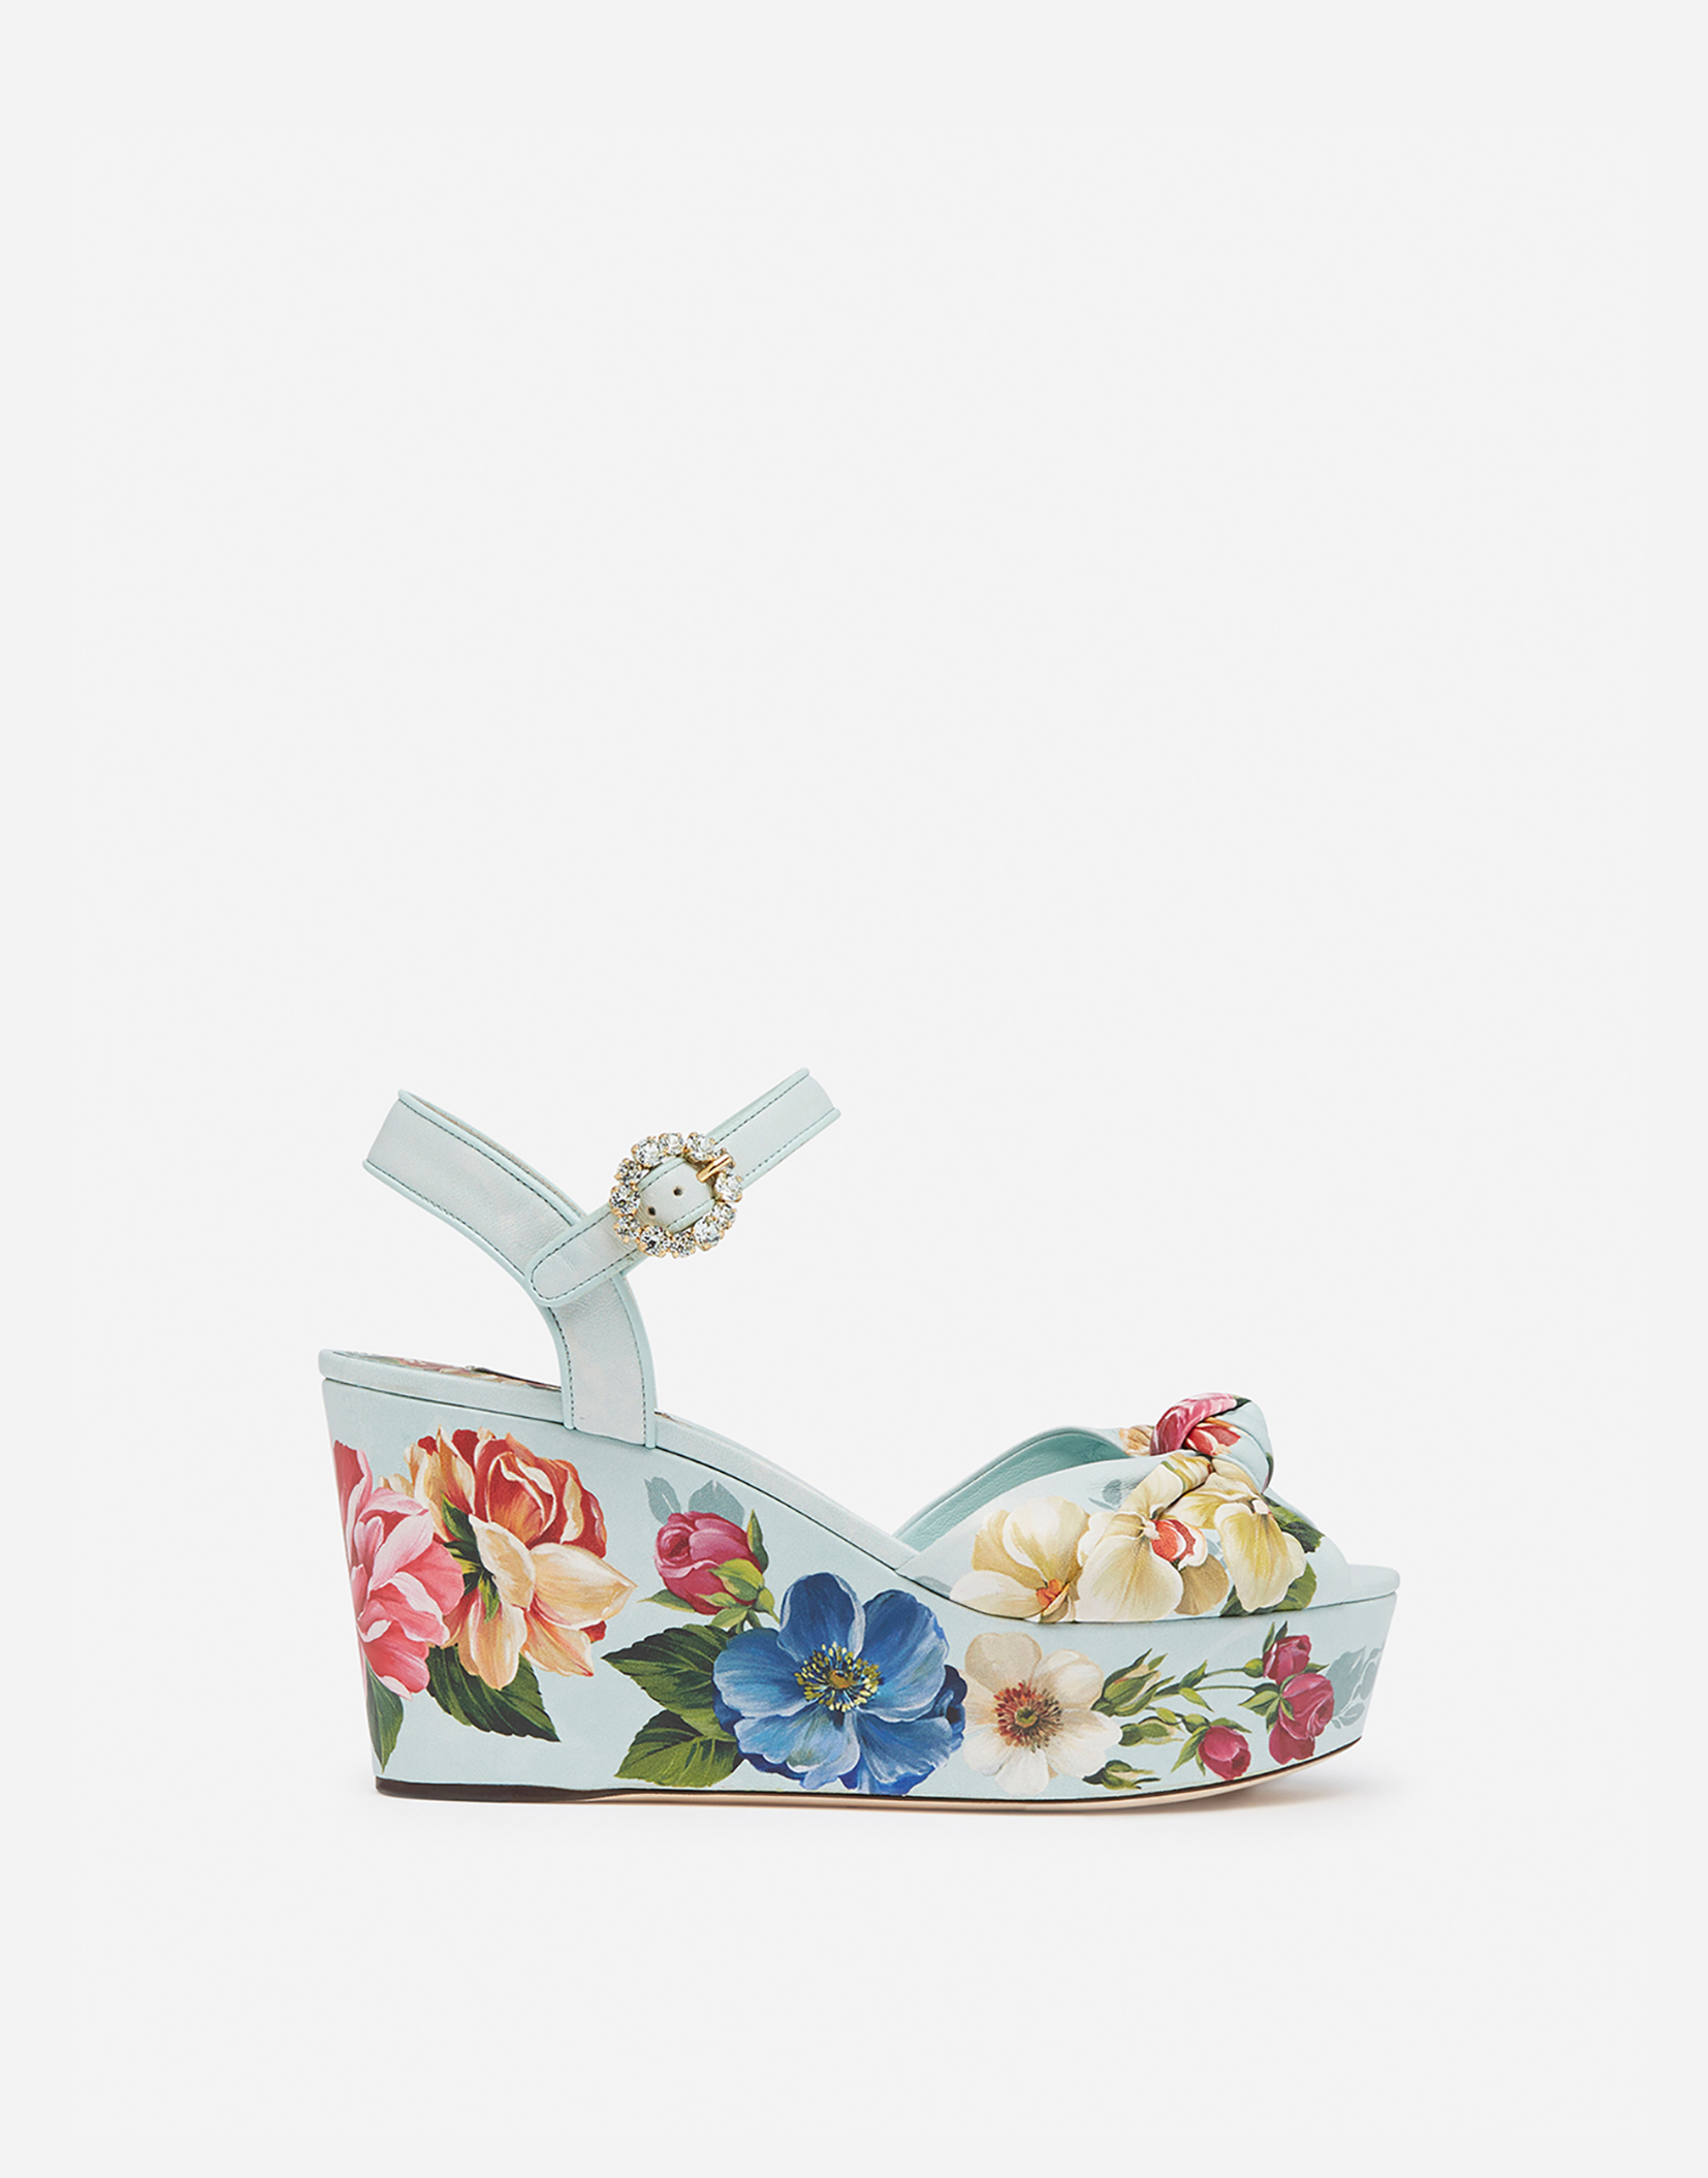 DOLCE & GABBANA NAPPA LEATHER WEDGE SANDALS WITH FLORAL PRINT